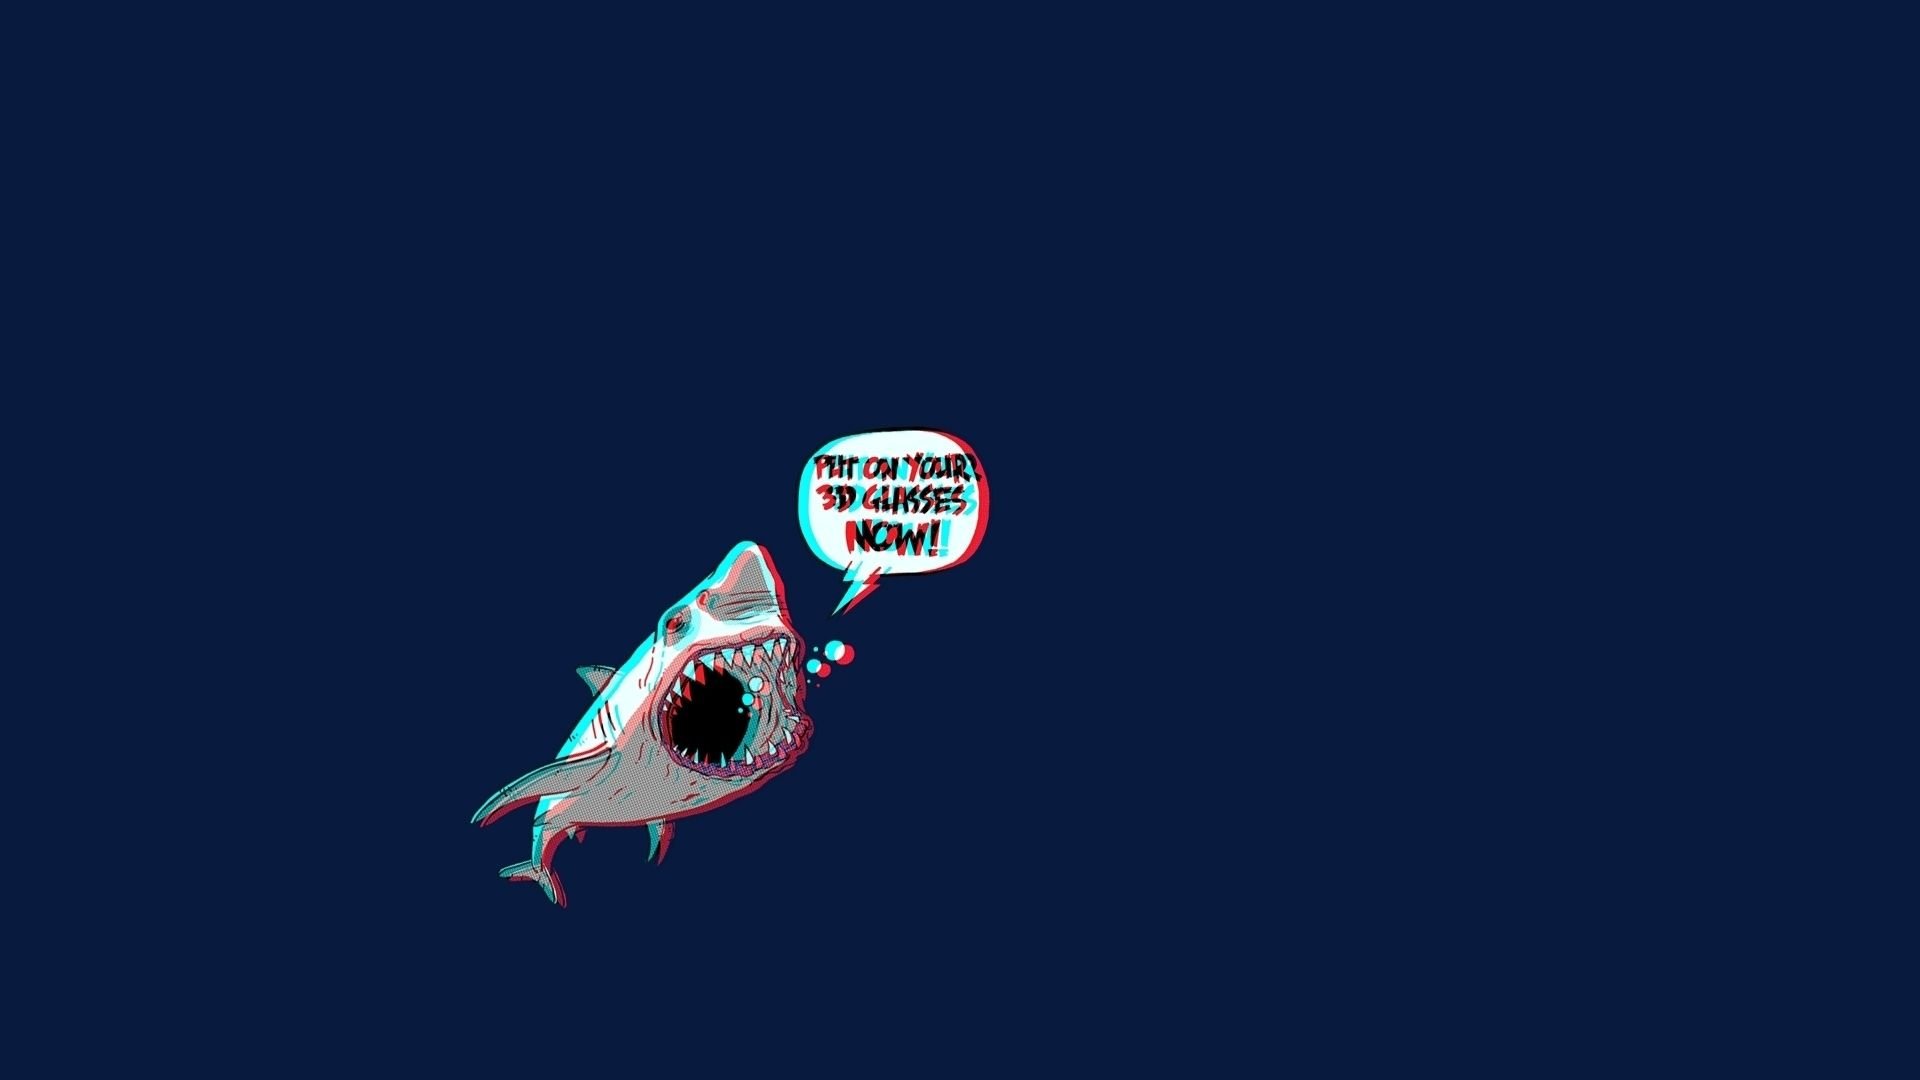 Shark 4K wallpaper for your desktop or mobile screen free and easy to download